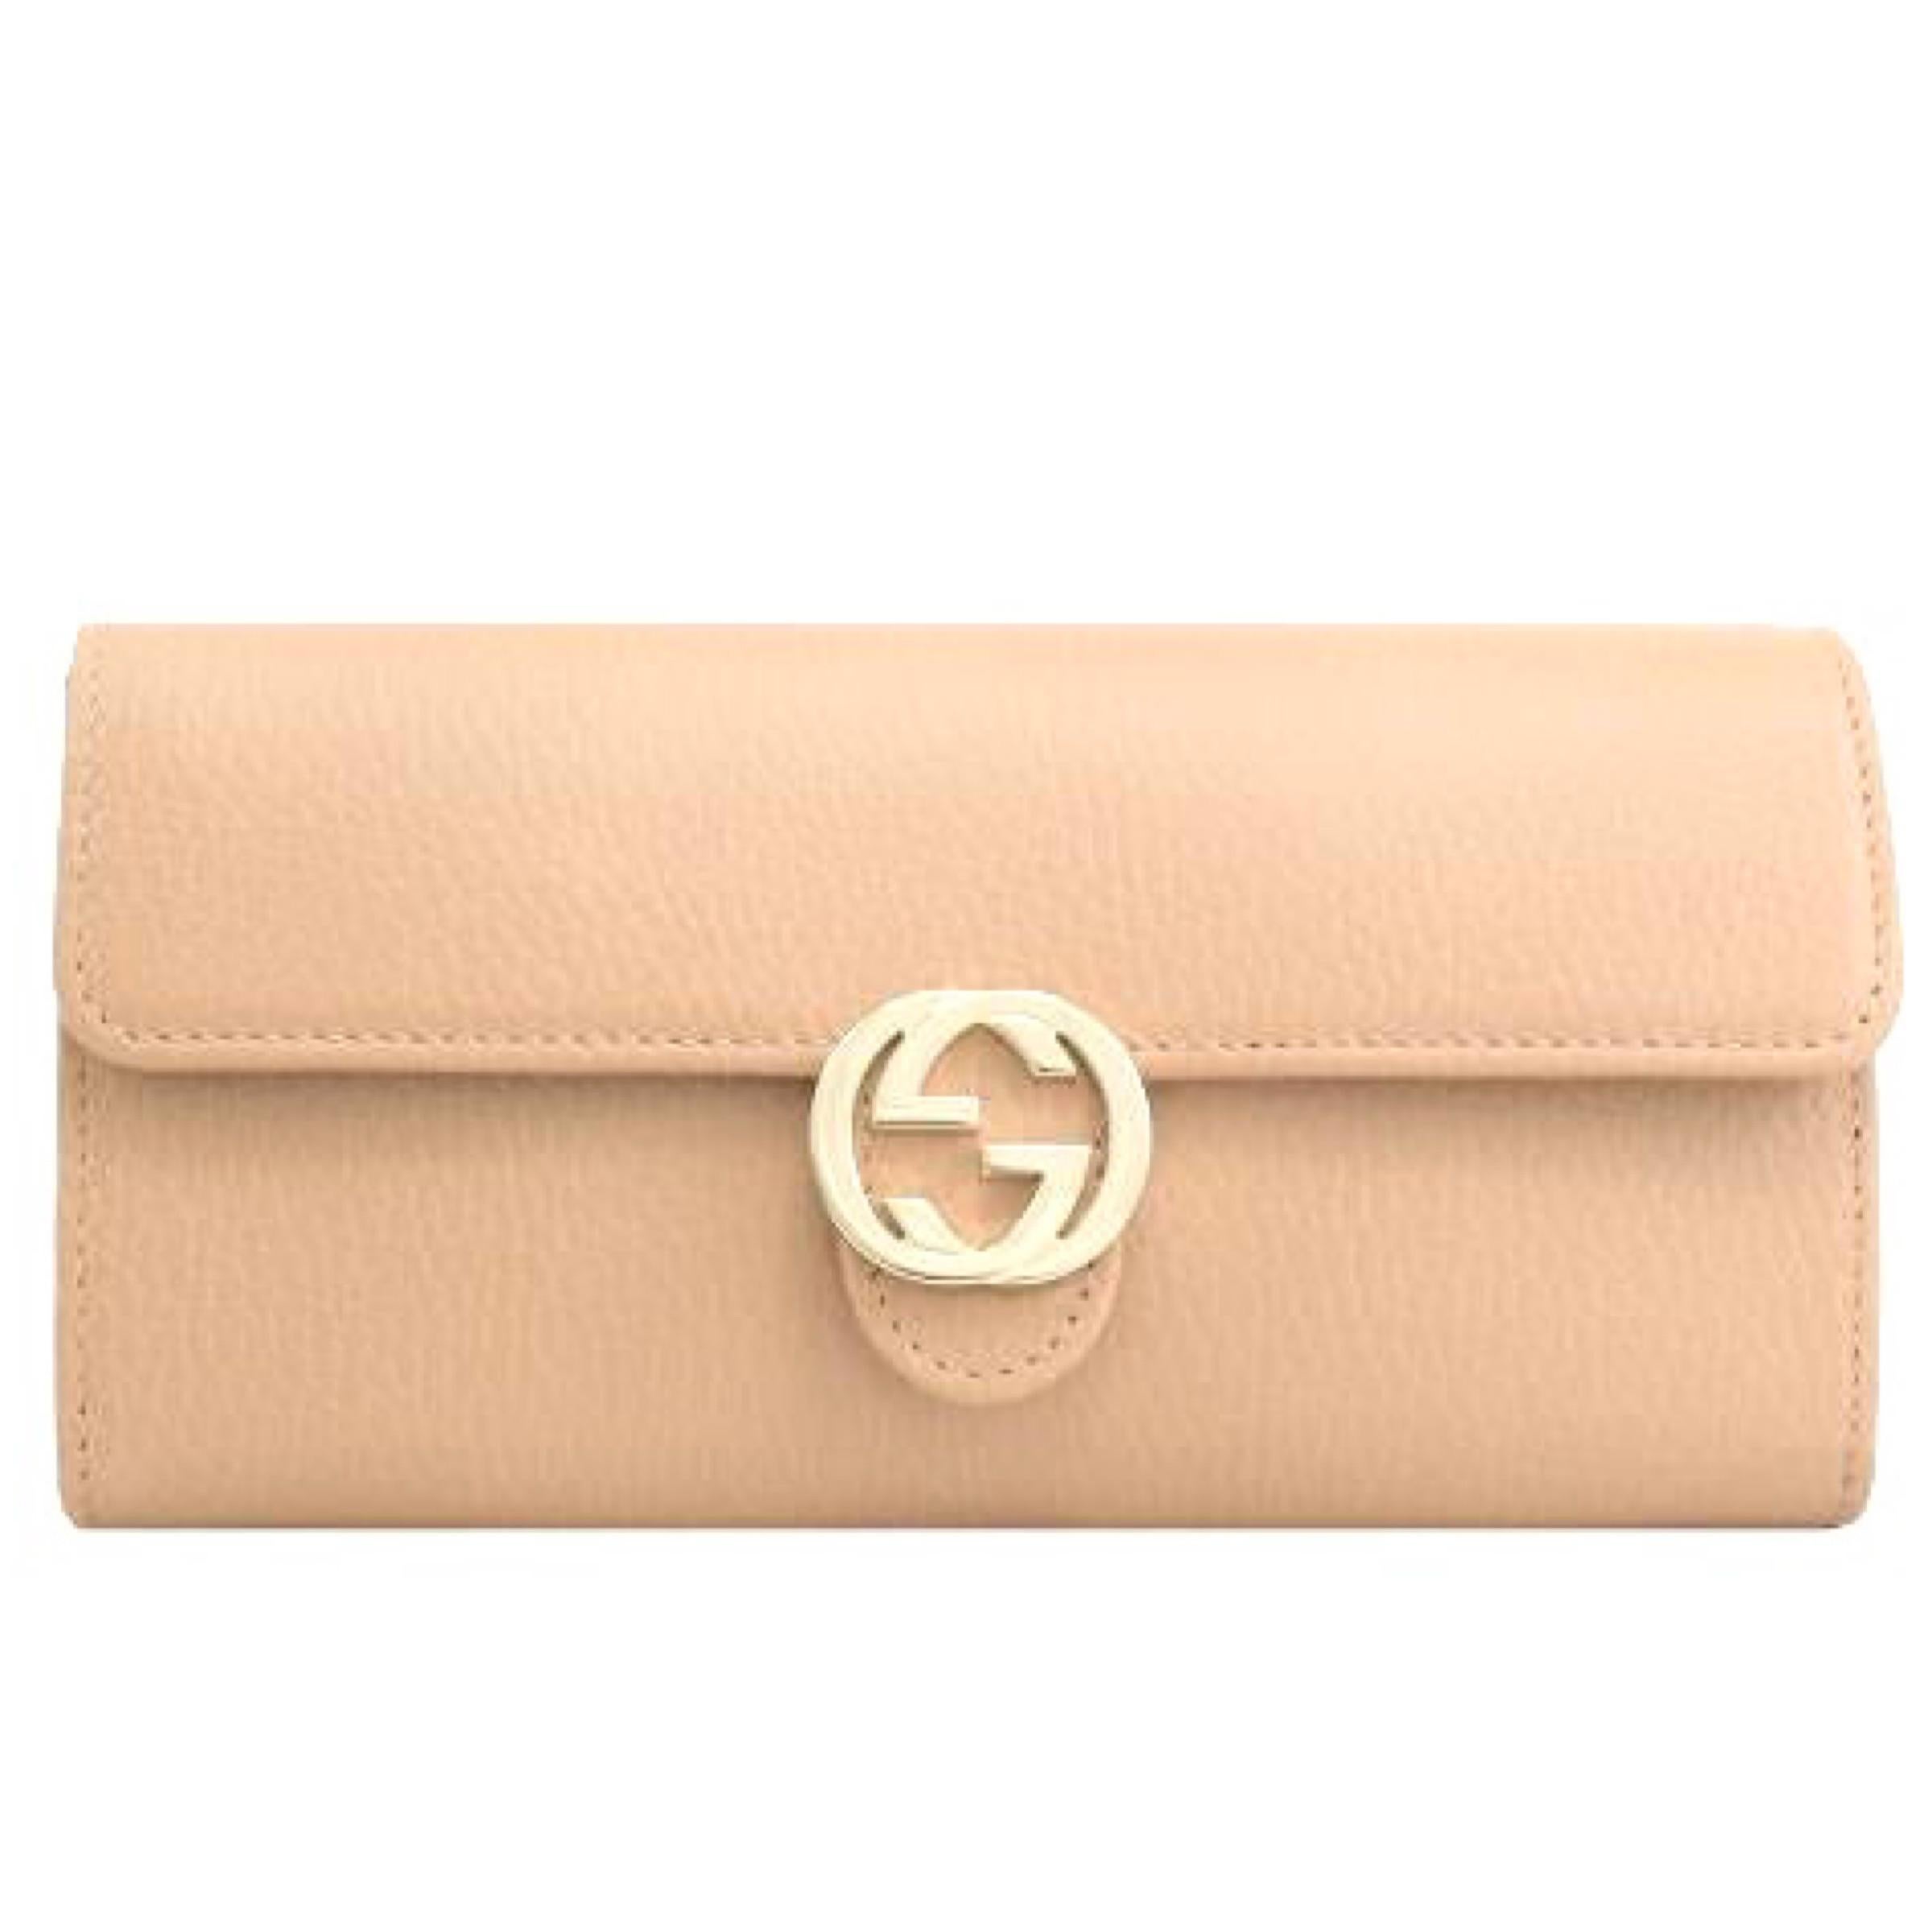 New Gucci Beige Interlocking G Leather Long Wallet Clutch Bag

Authenticity Guaranteed

DETAILS
Brand: Gucci
Condition: Brand new
Gender: Women
Category: Clutch
Color: Beige
Material: Leather
Interlocking G plaque
Gold-tone hardware
Snap button